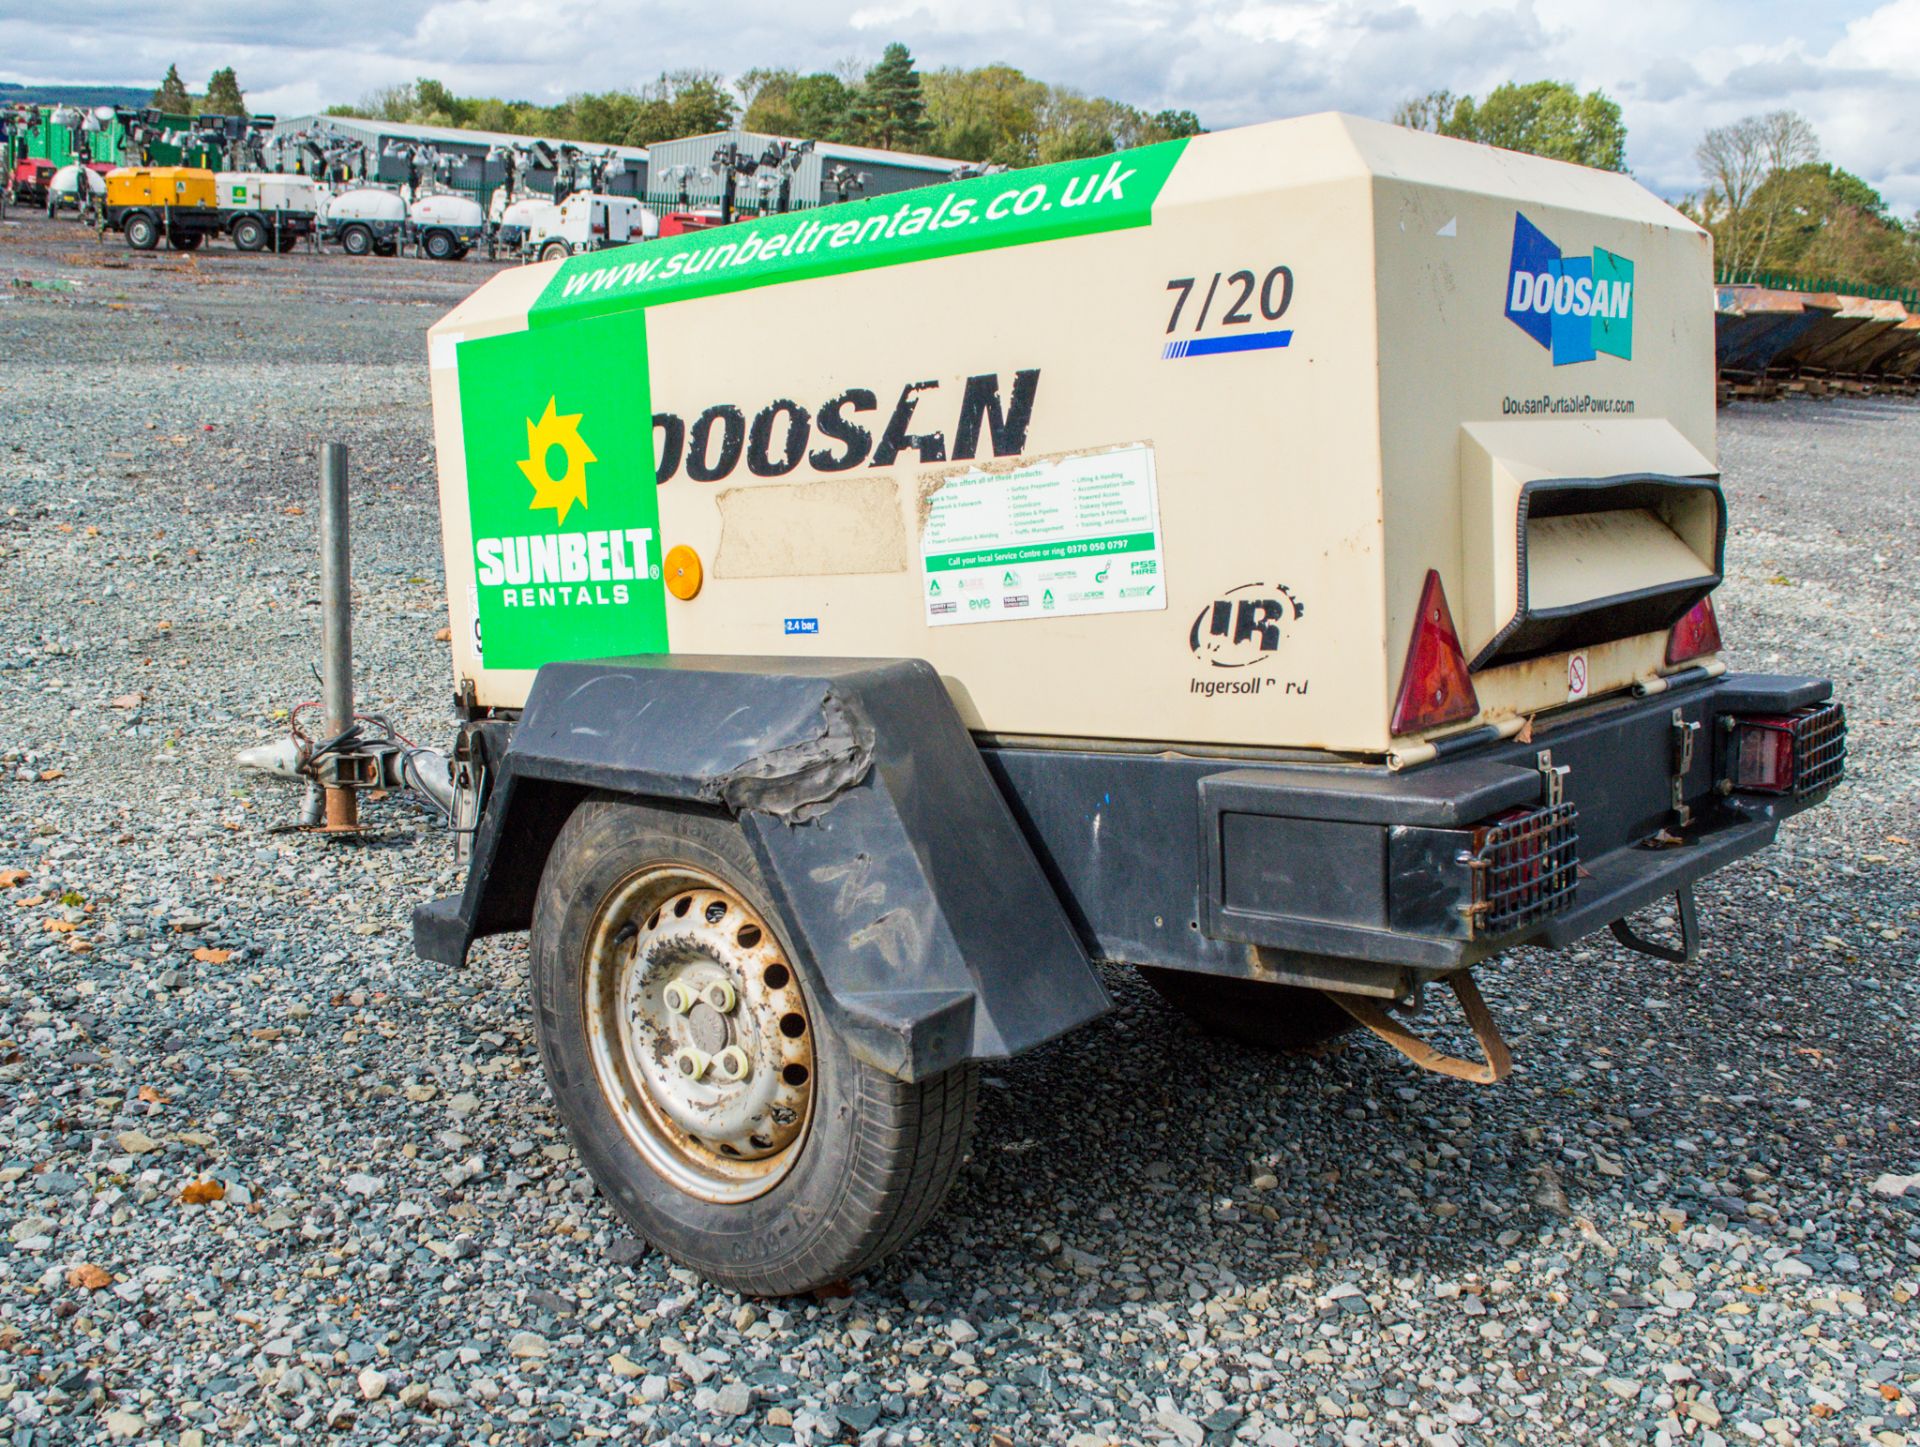 Doosan 7/20 diesel driven fast tow air compressor  Year: 2012 S/N: 123302 Recorded Hours: 597 - Image 2 of 4